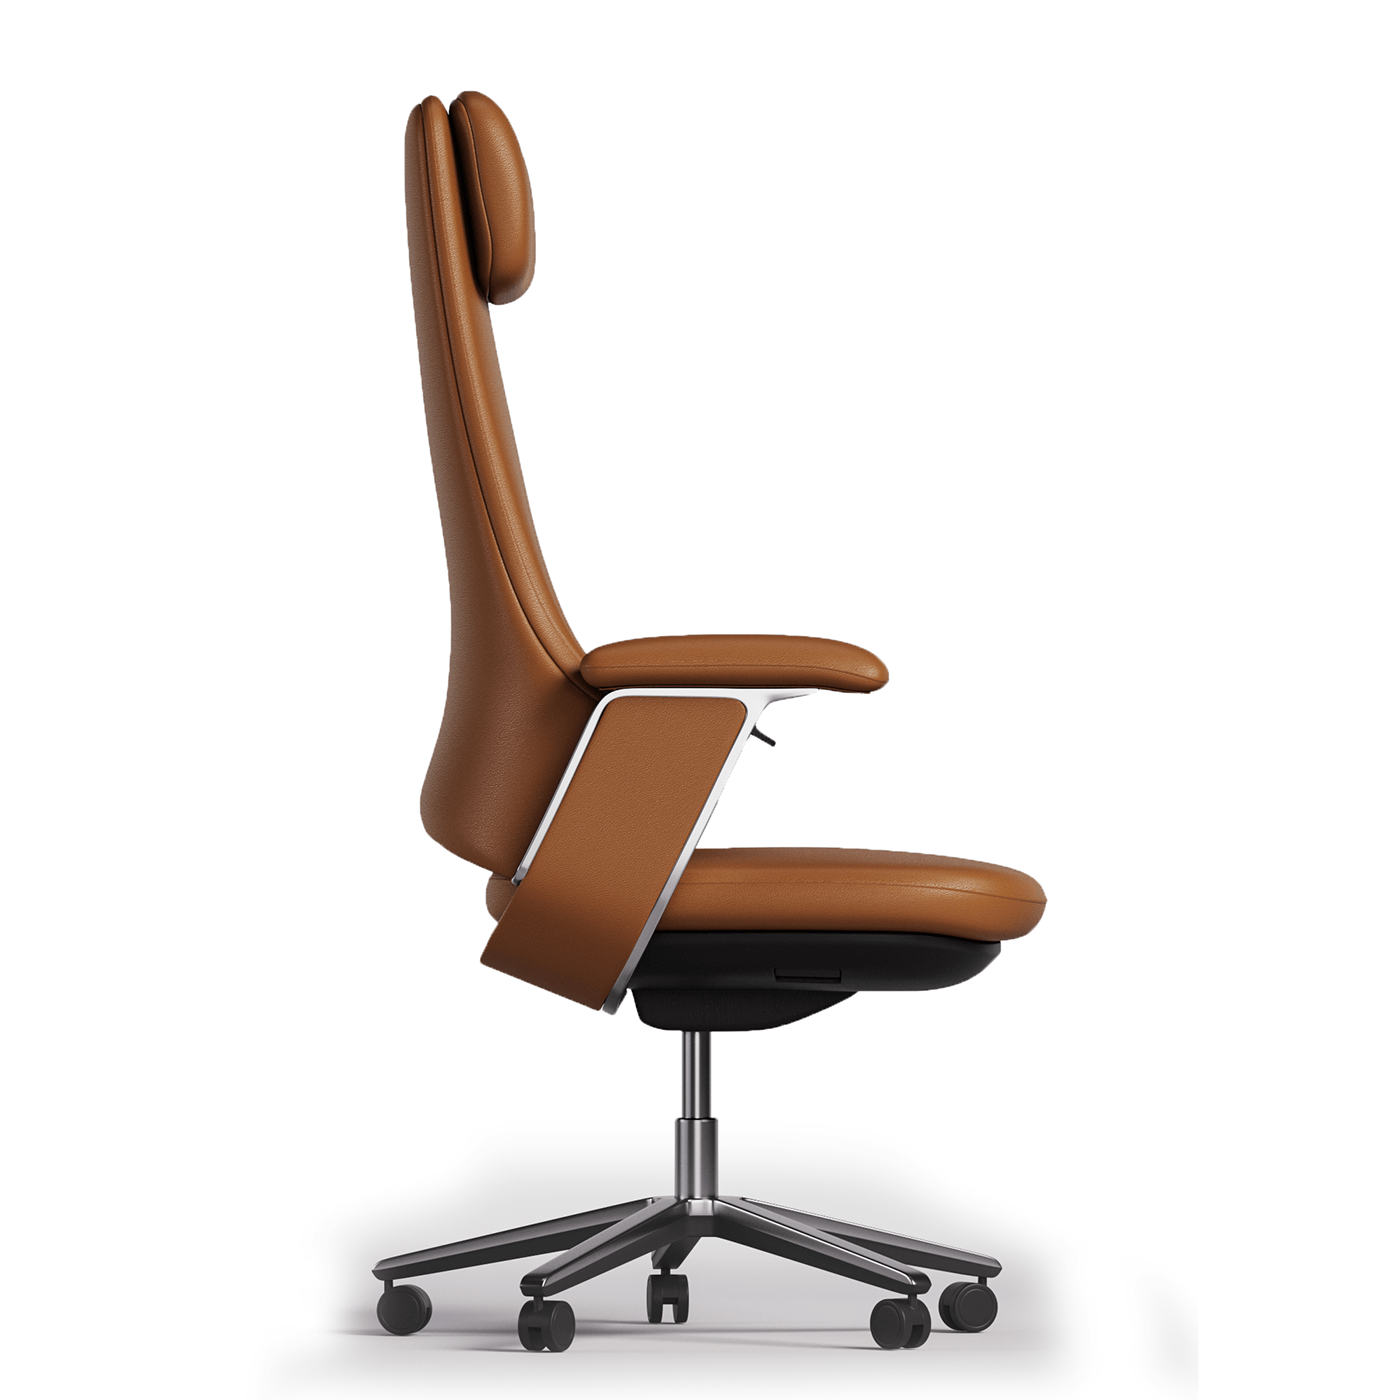 office furniture Office Design Office chair leather furniture interior design  product design  armcchair york